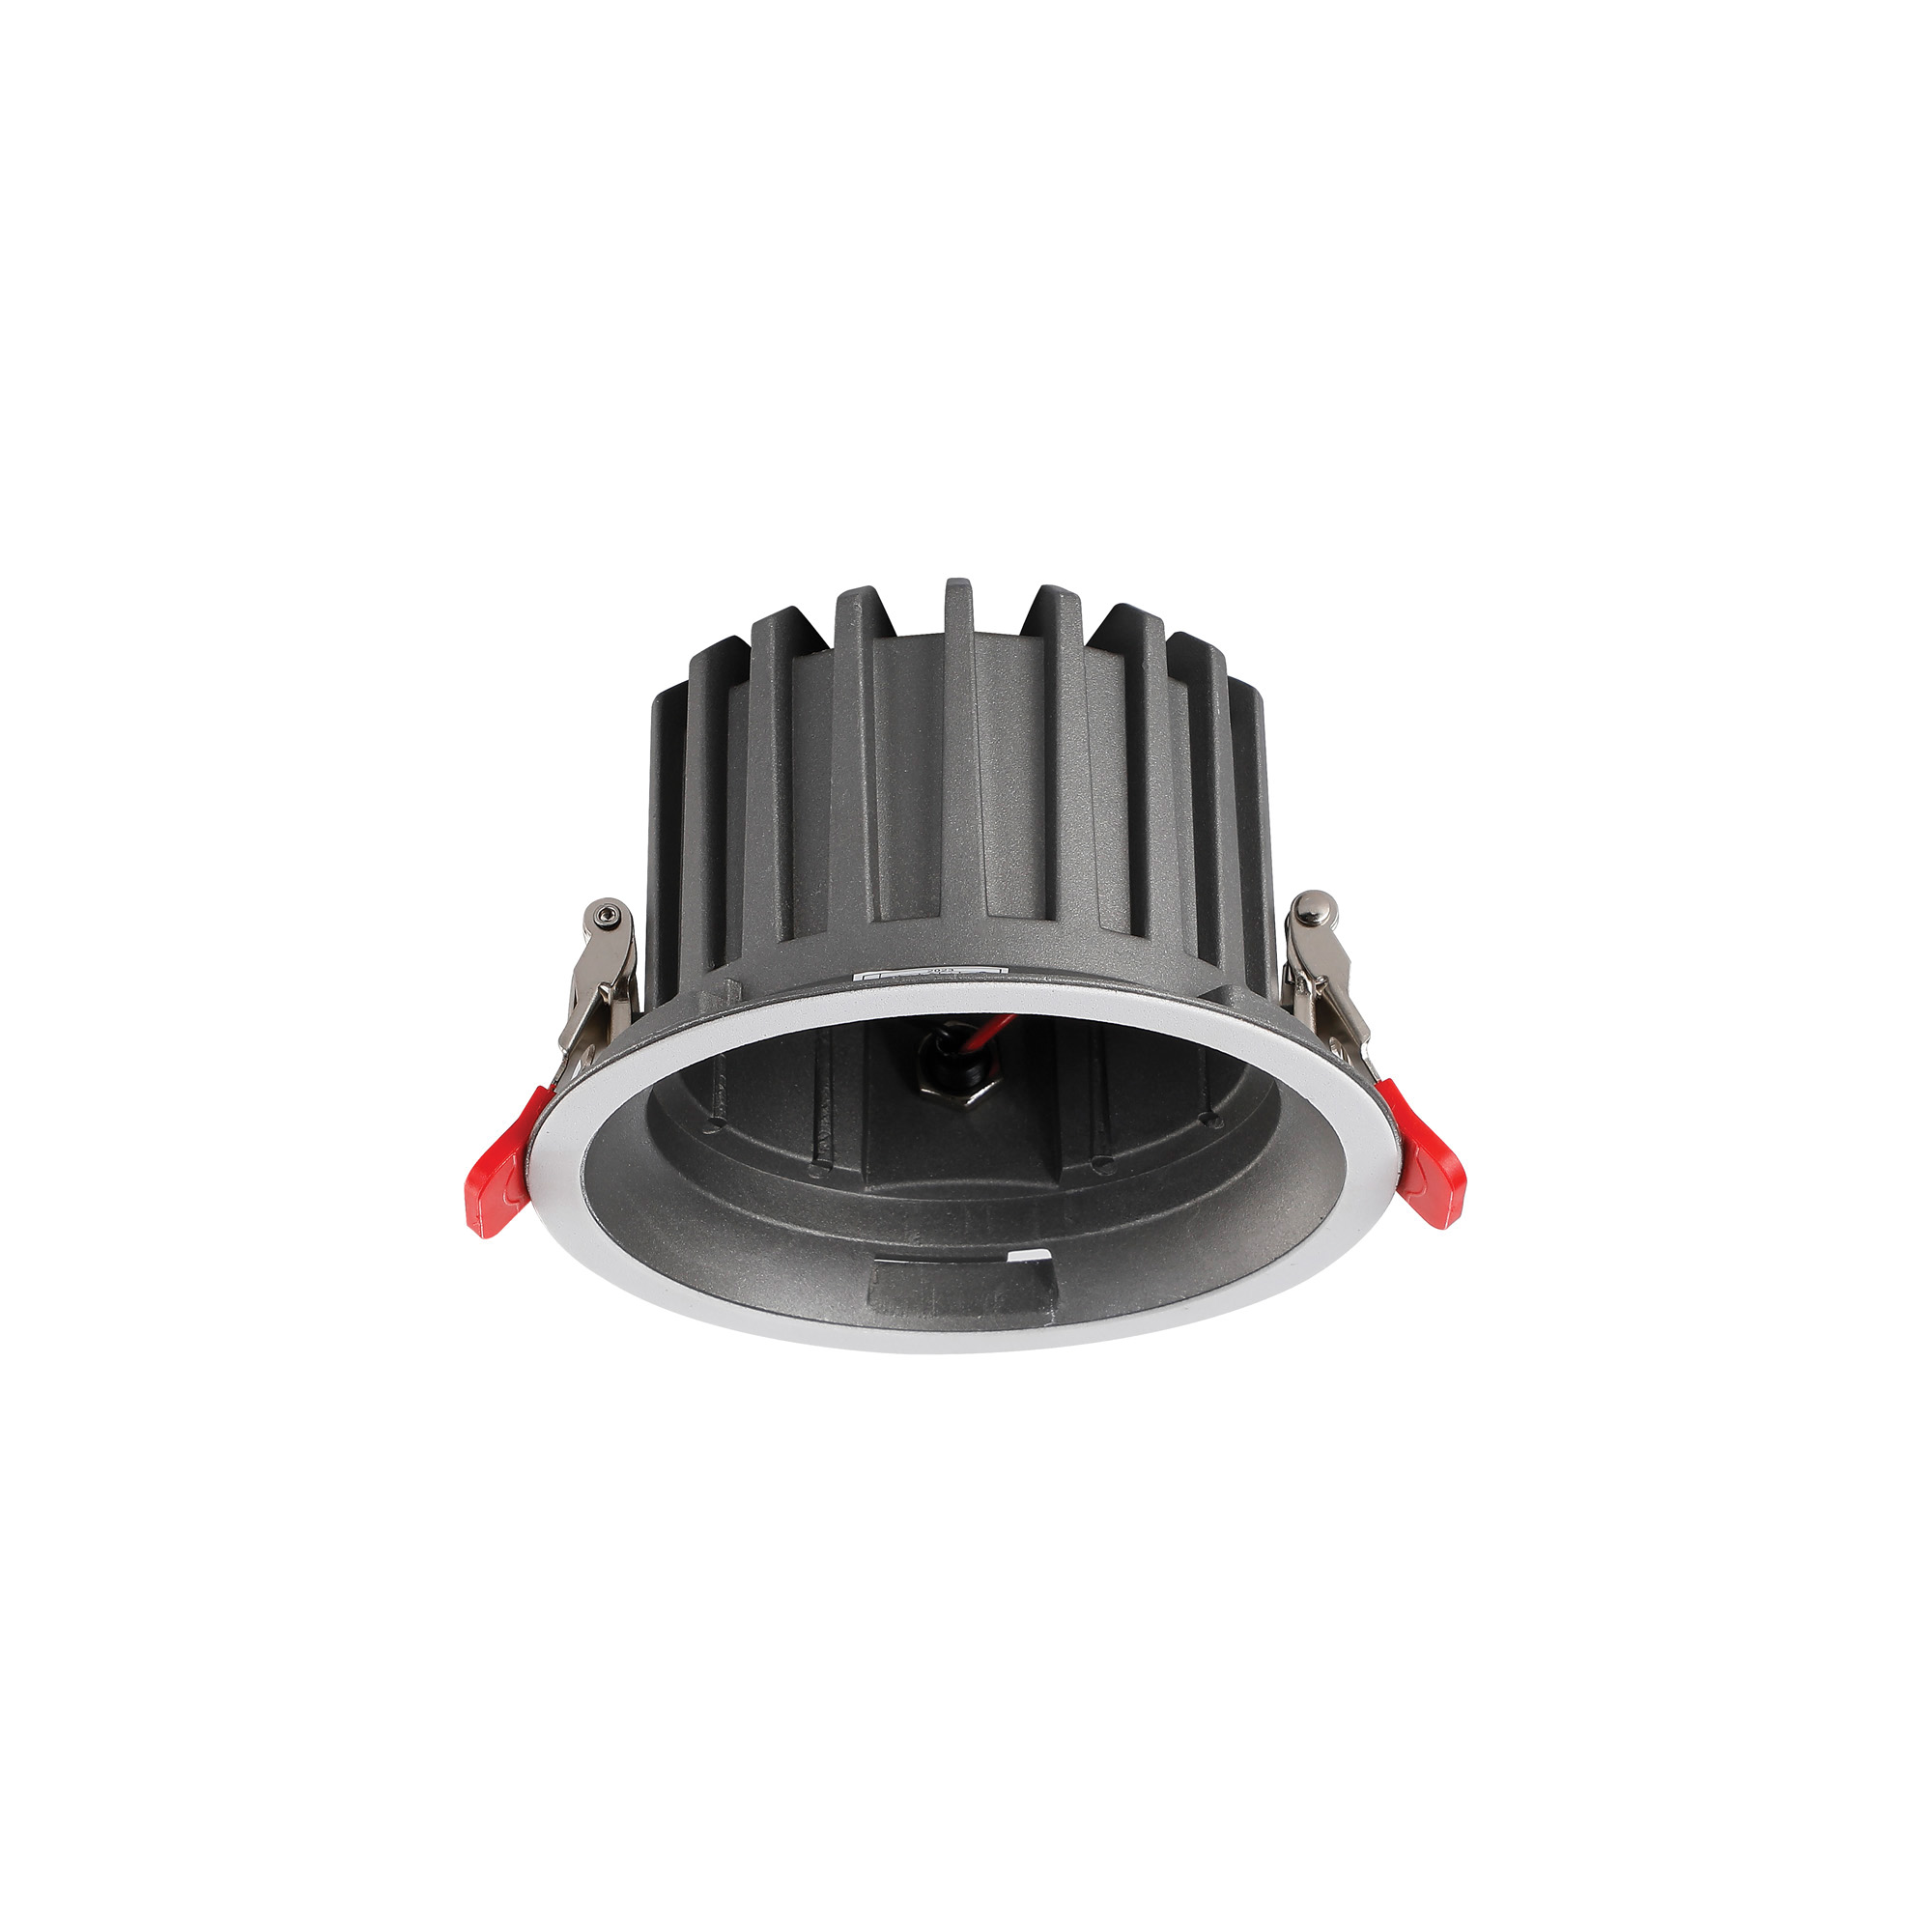 DX200420  Bionic 15W Round Recessed Fixed housing Only Without Light Engin ; White; Suitable for Bionic Engine.